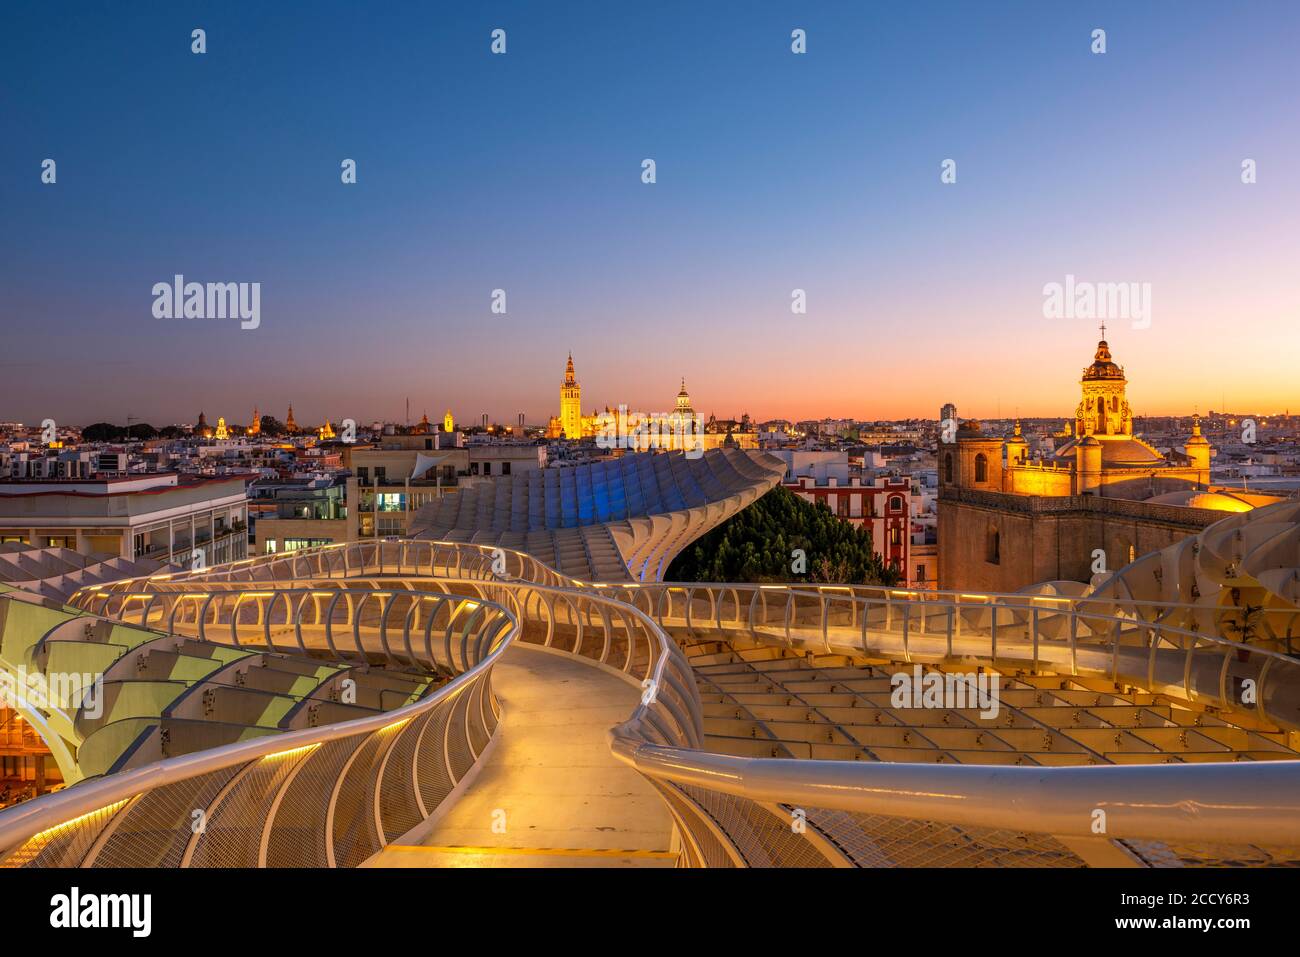 View over Sevilla from Metropol Parasol at sunset, curved wooden construction, Cathedral of Sevilla with tower La Giralda, Iglesia del Salvador and Stock Photo